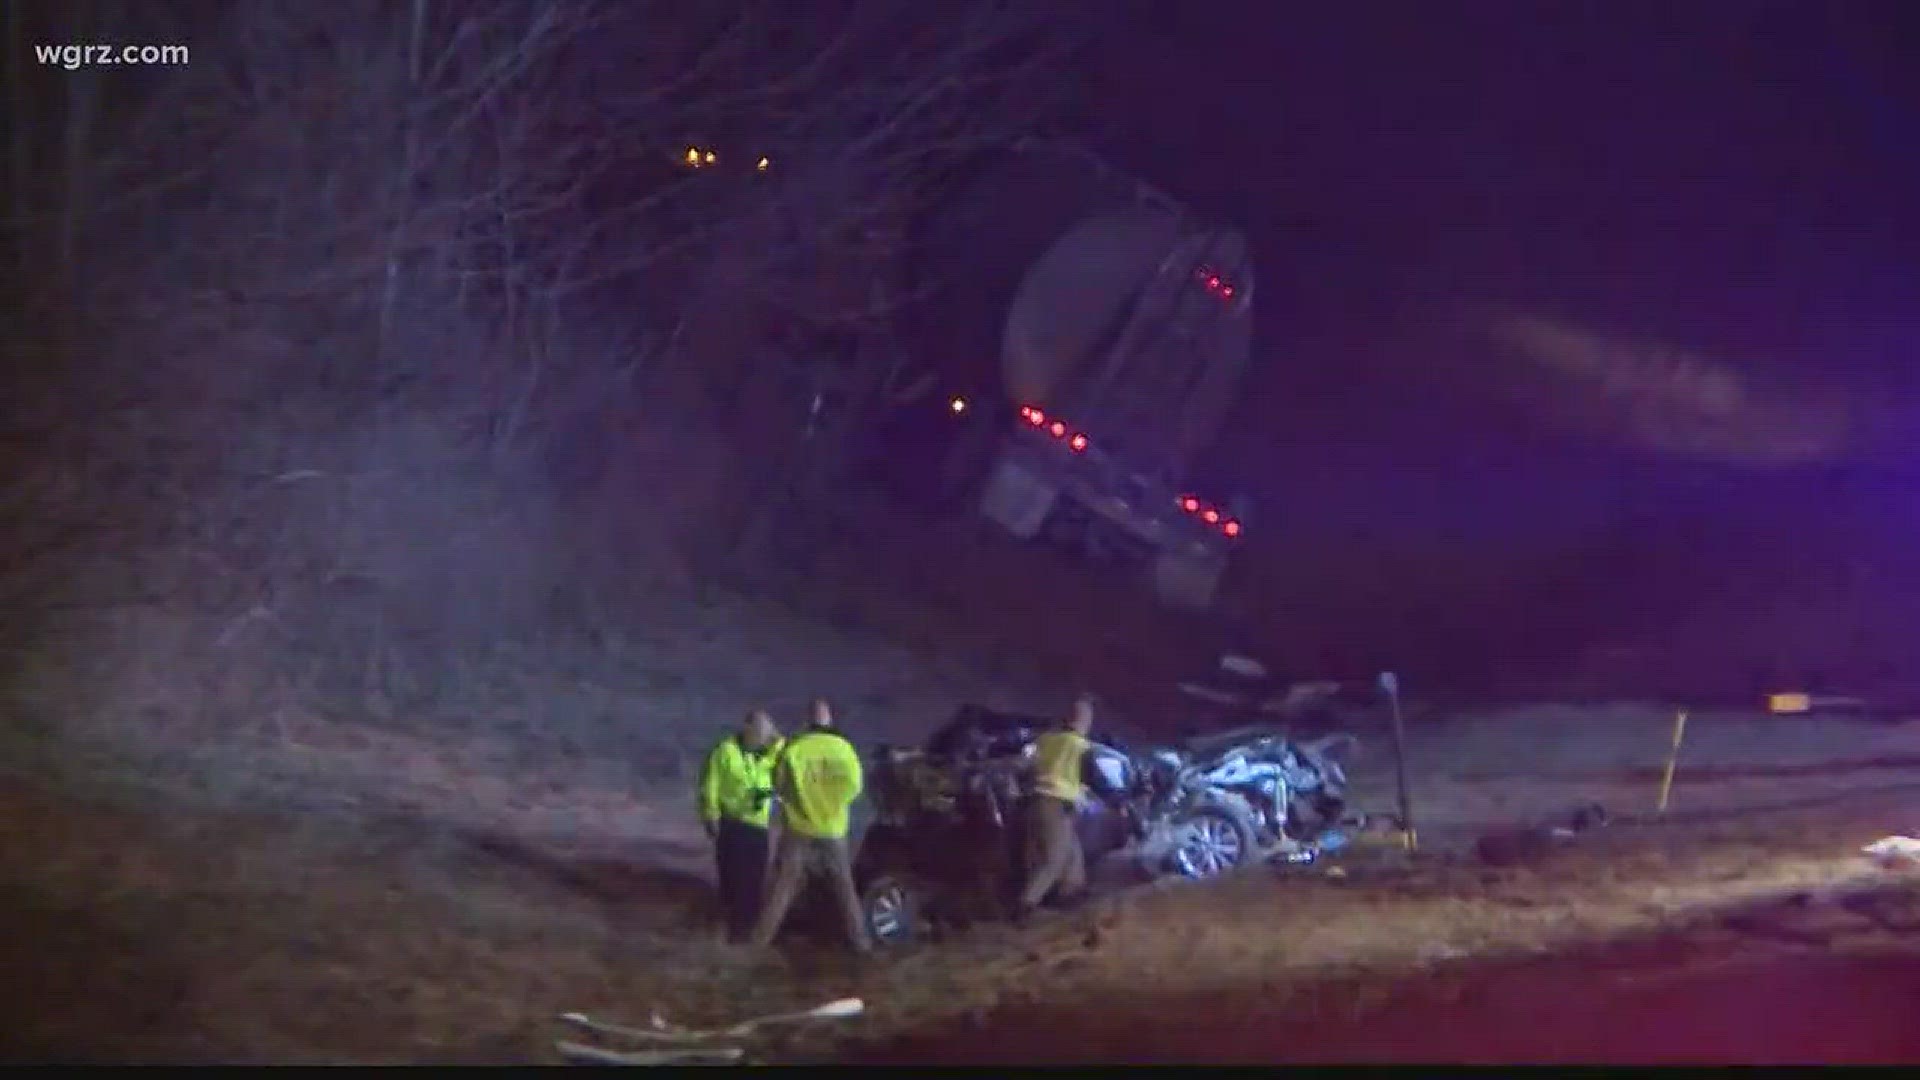 Woman killed in accident on the NYS Thruway near Westfield